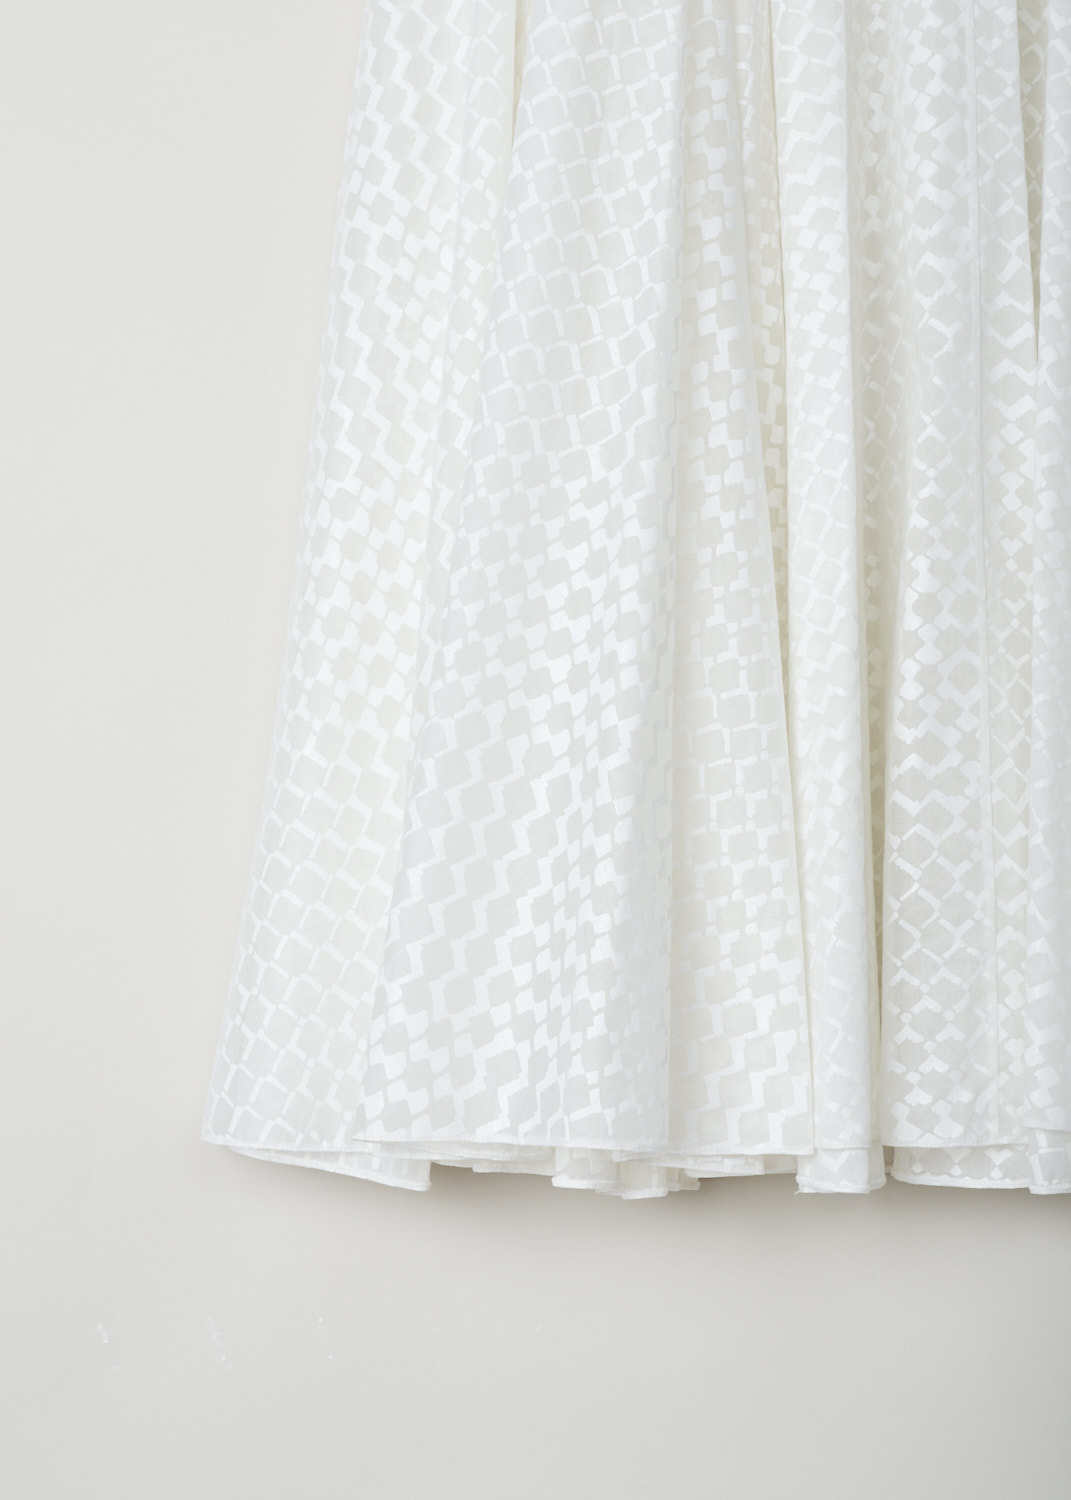 AlaÃ¯a, Off-white slightly see-through tulle skirt, AS9J648TT314_C000_blanc, white, detail, Made from thinly woven cotton and is slightly see-through, embellished with a white lozenge motif. The length of the skirt comes to about ankle height.